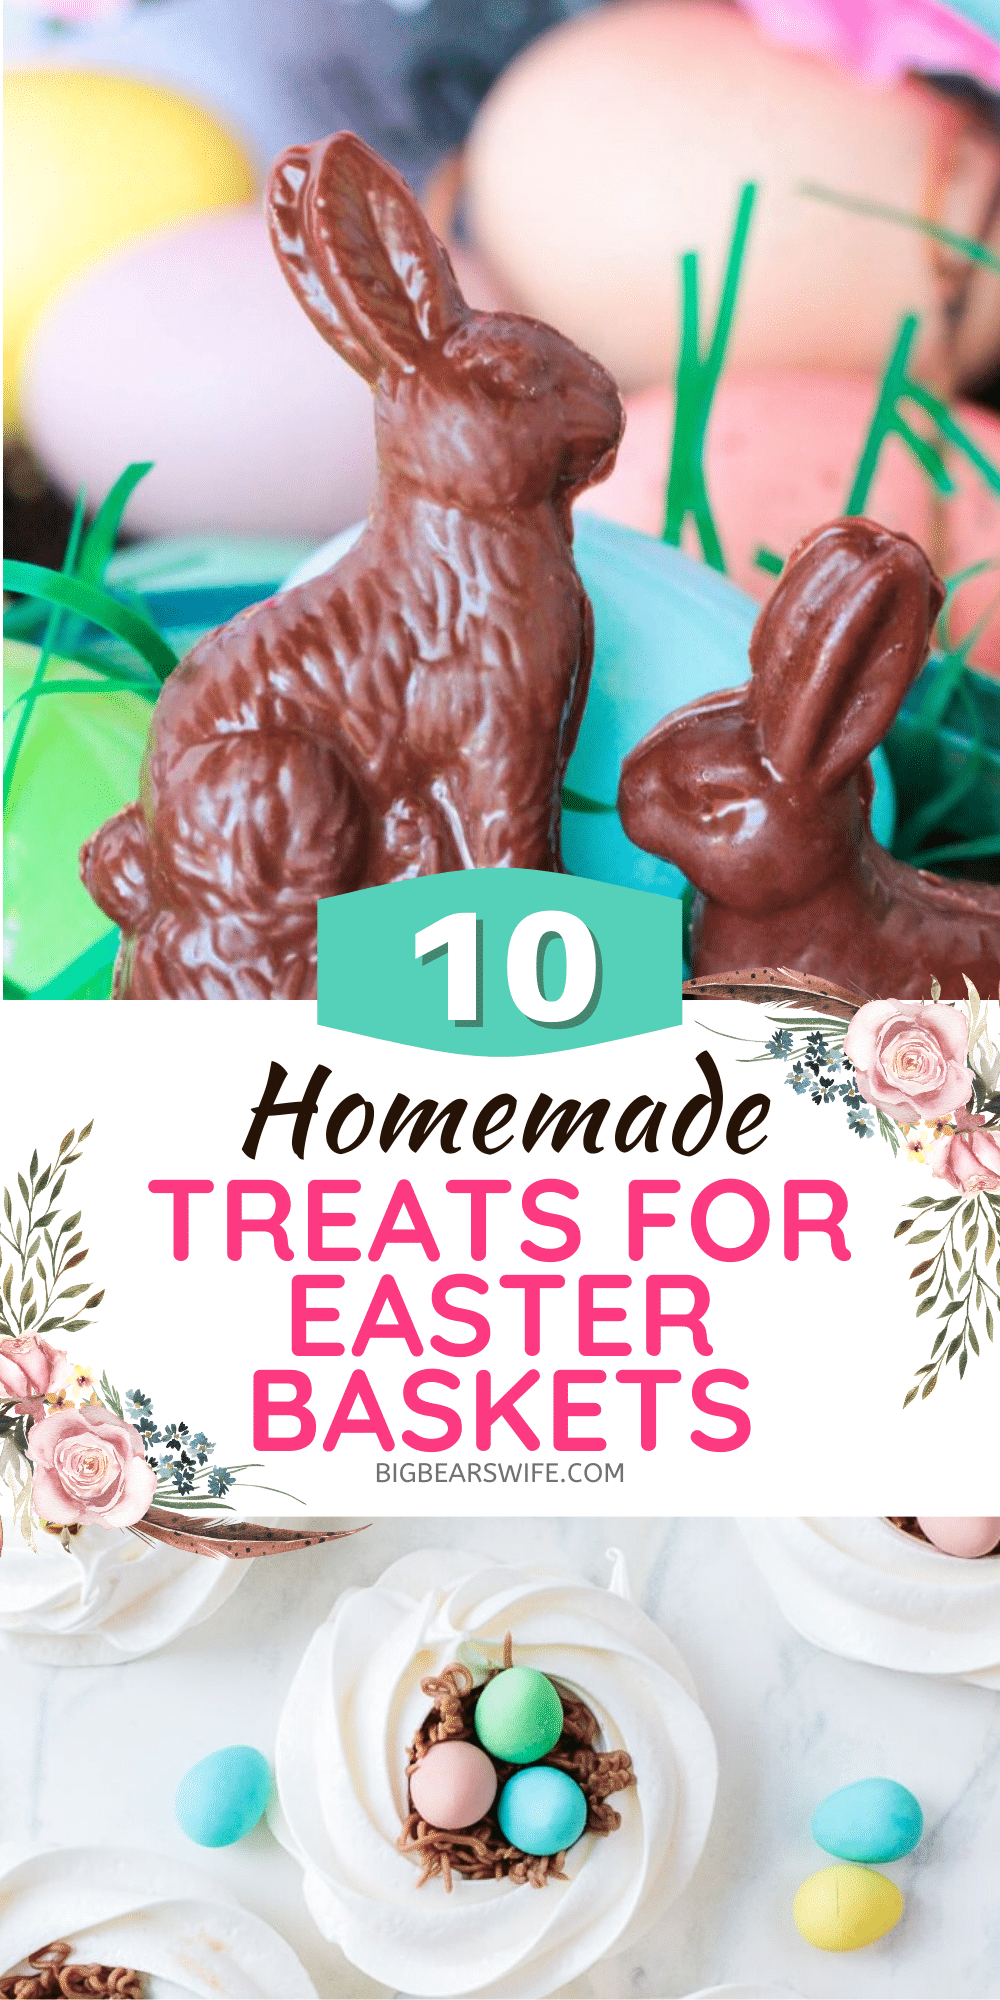 If you're filling Easter baskets for your kids or grandchildren this year or maybe just helping the Easter Bunny with some ideas, you'll love these Homemade Easter Basket treats! Sure, store bought Easter surprises are neat but homemade treats are even better! Fill your little one's Easter basket with 10 of the best Homemade Treats for Easter Baskets this year!  via @bigbearswife